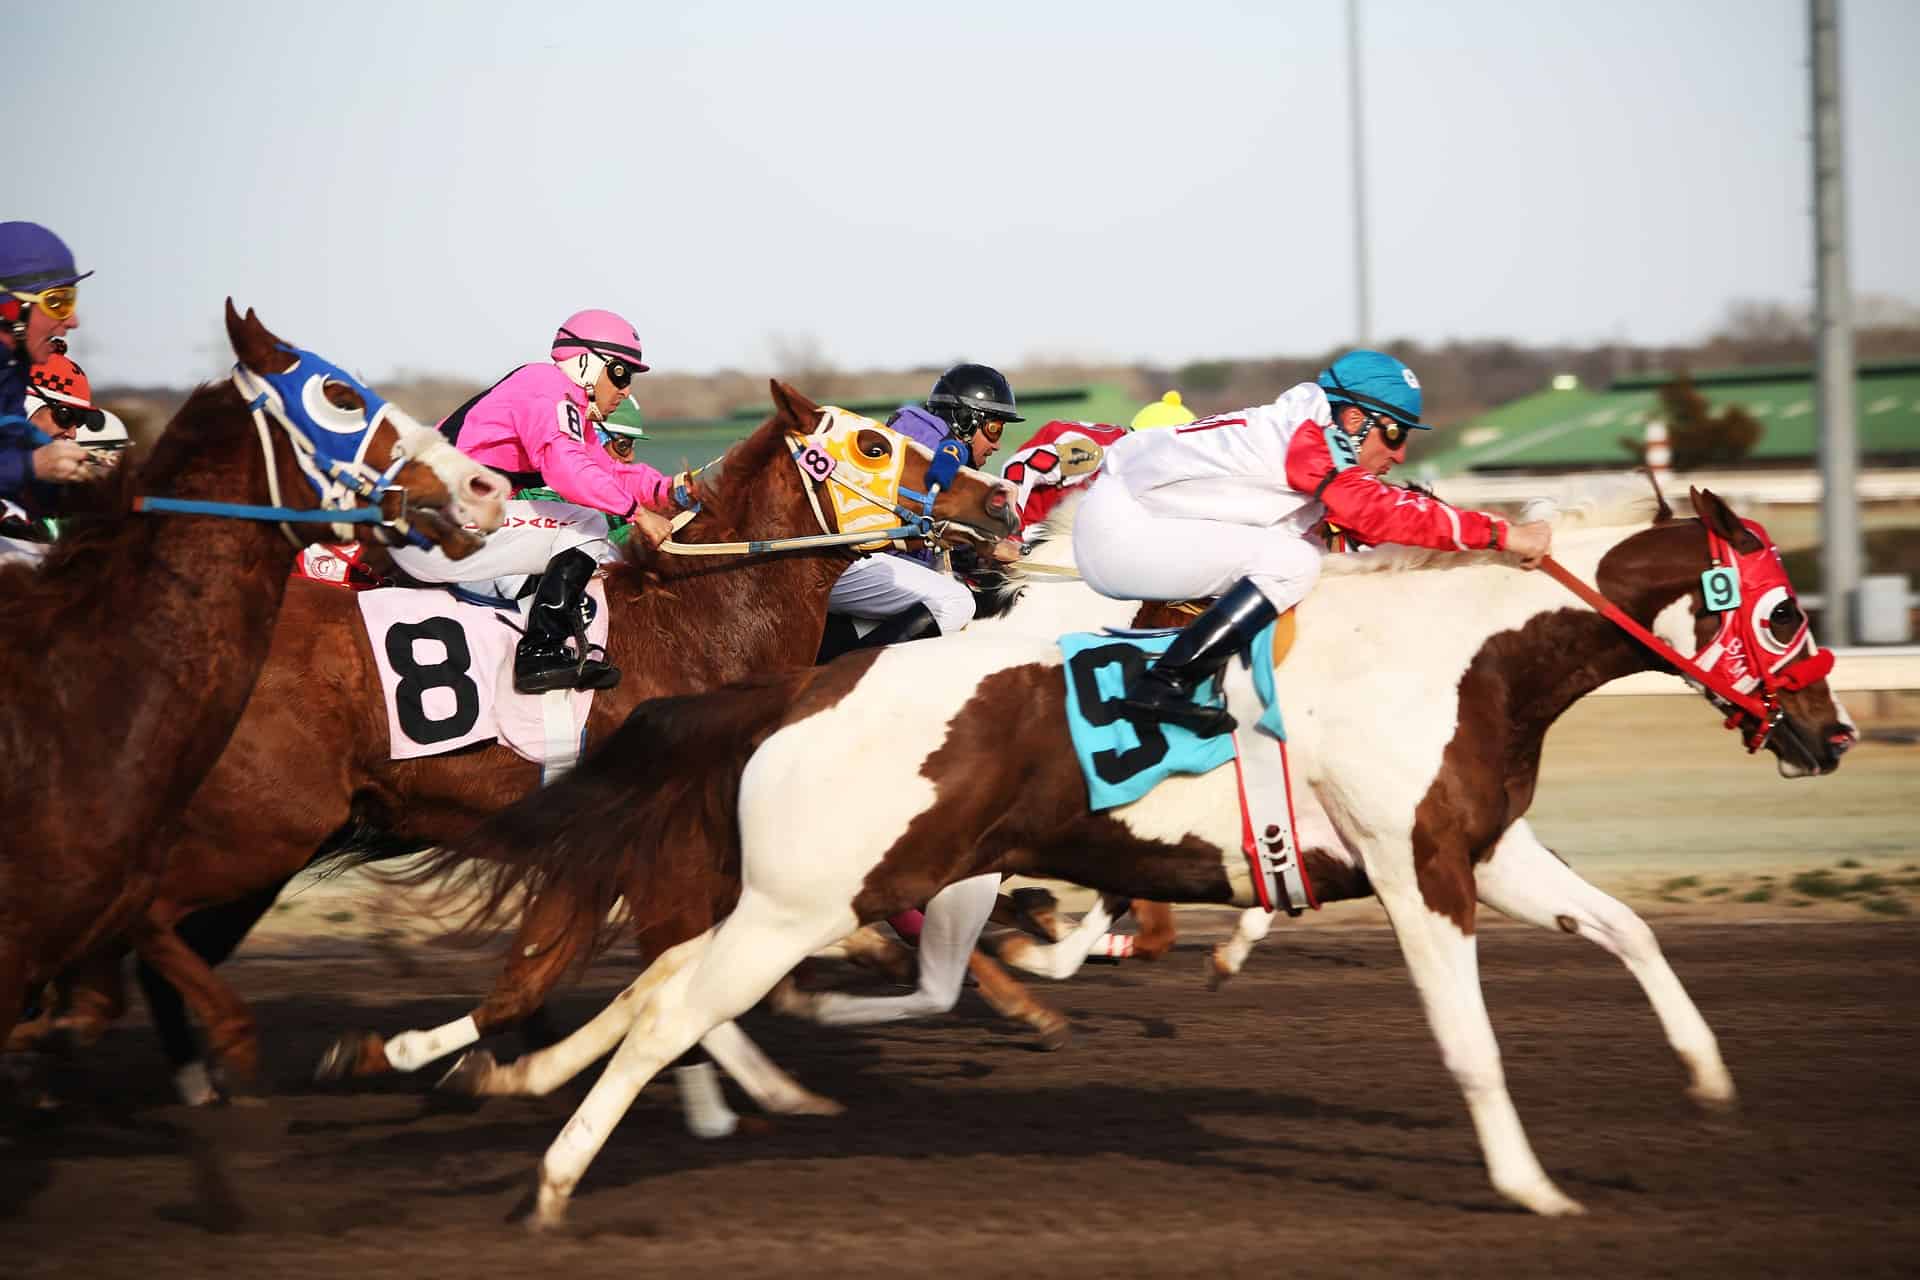 What are the best horse racing events to attend?